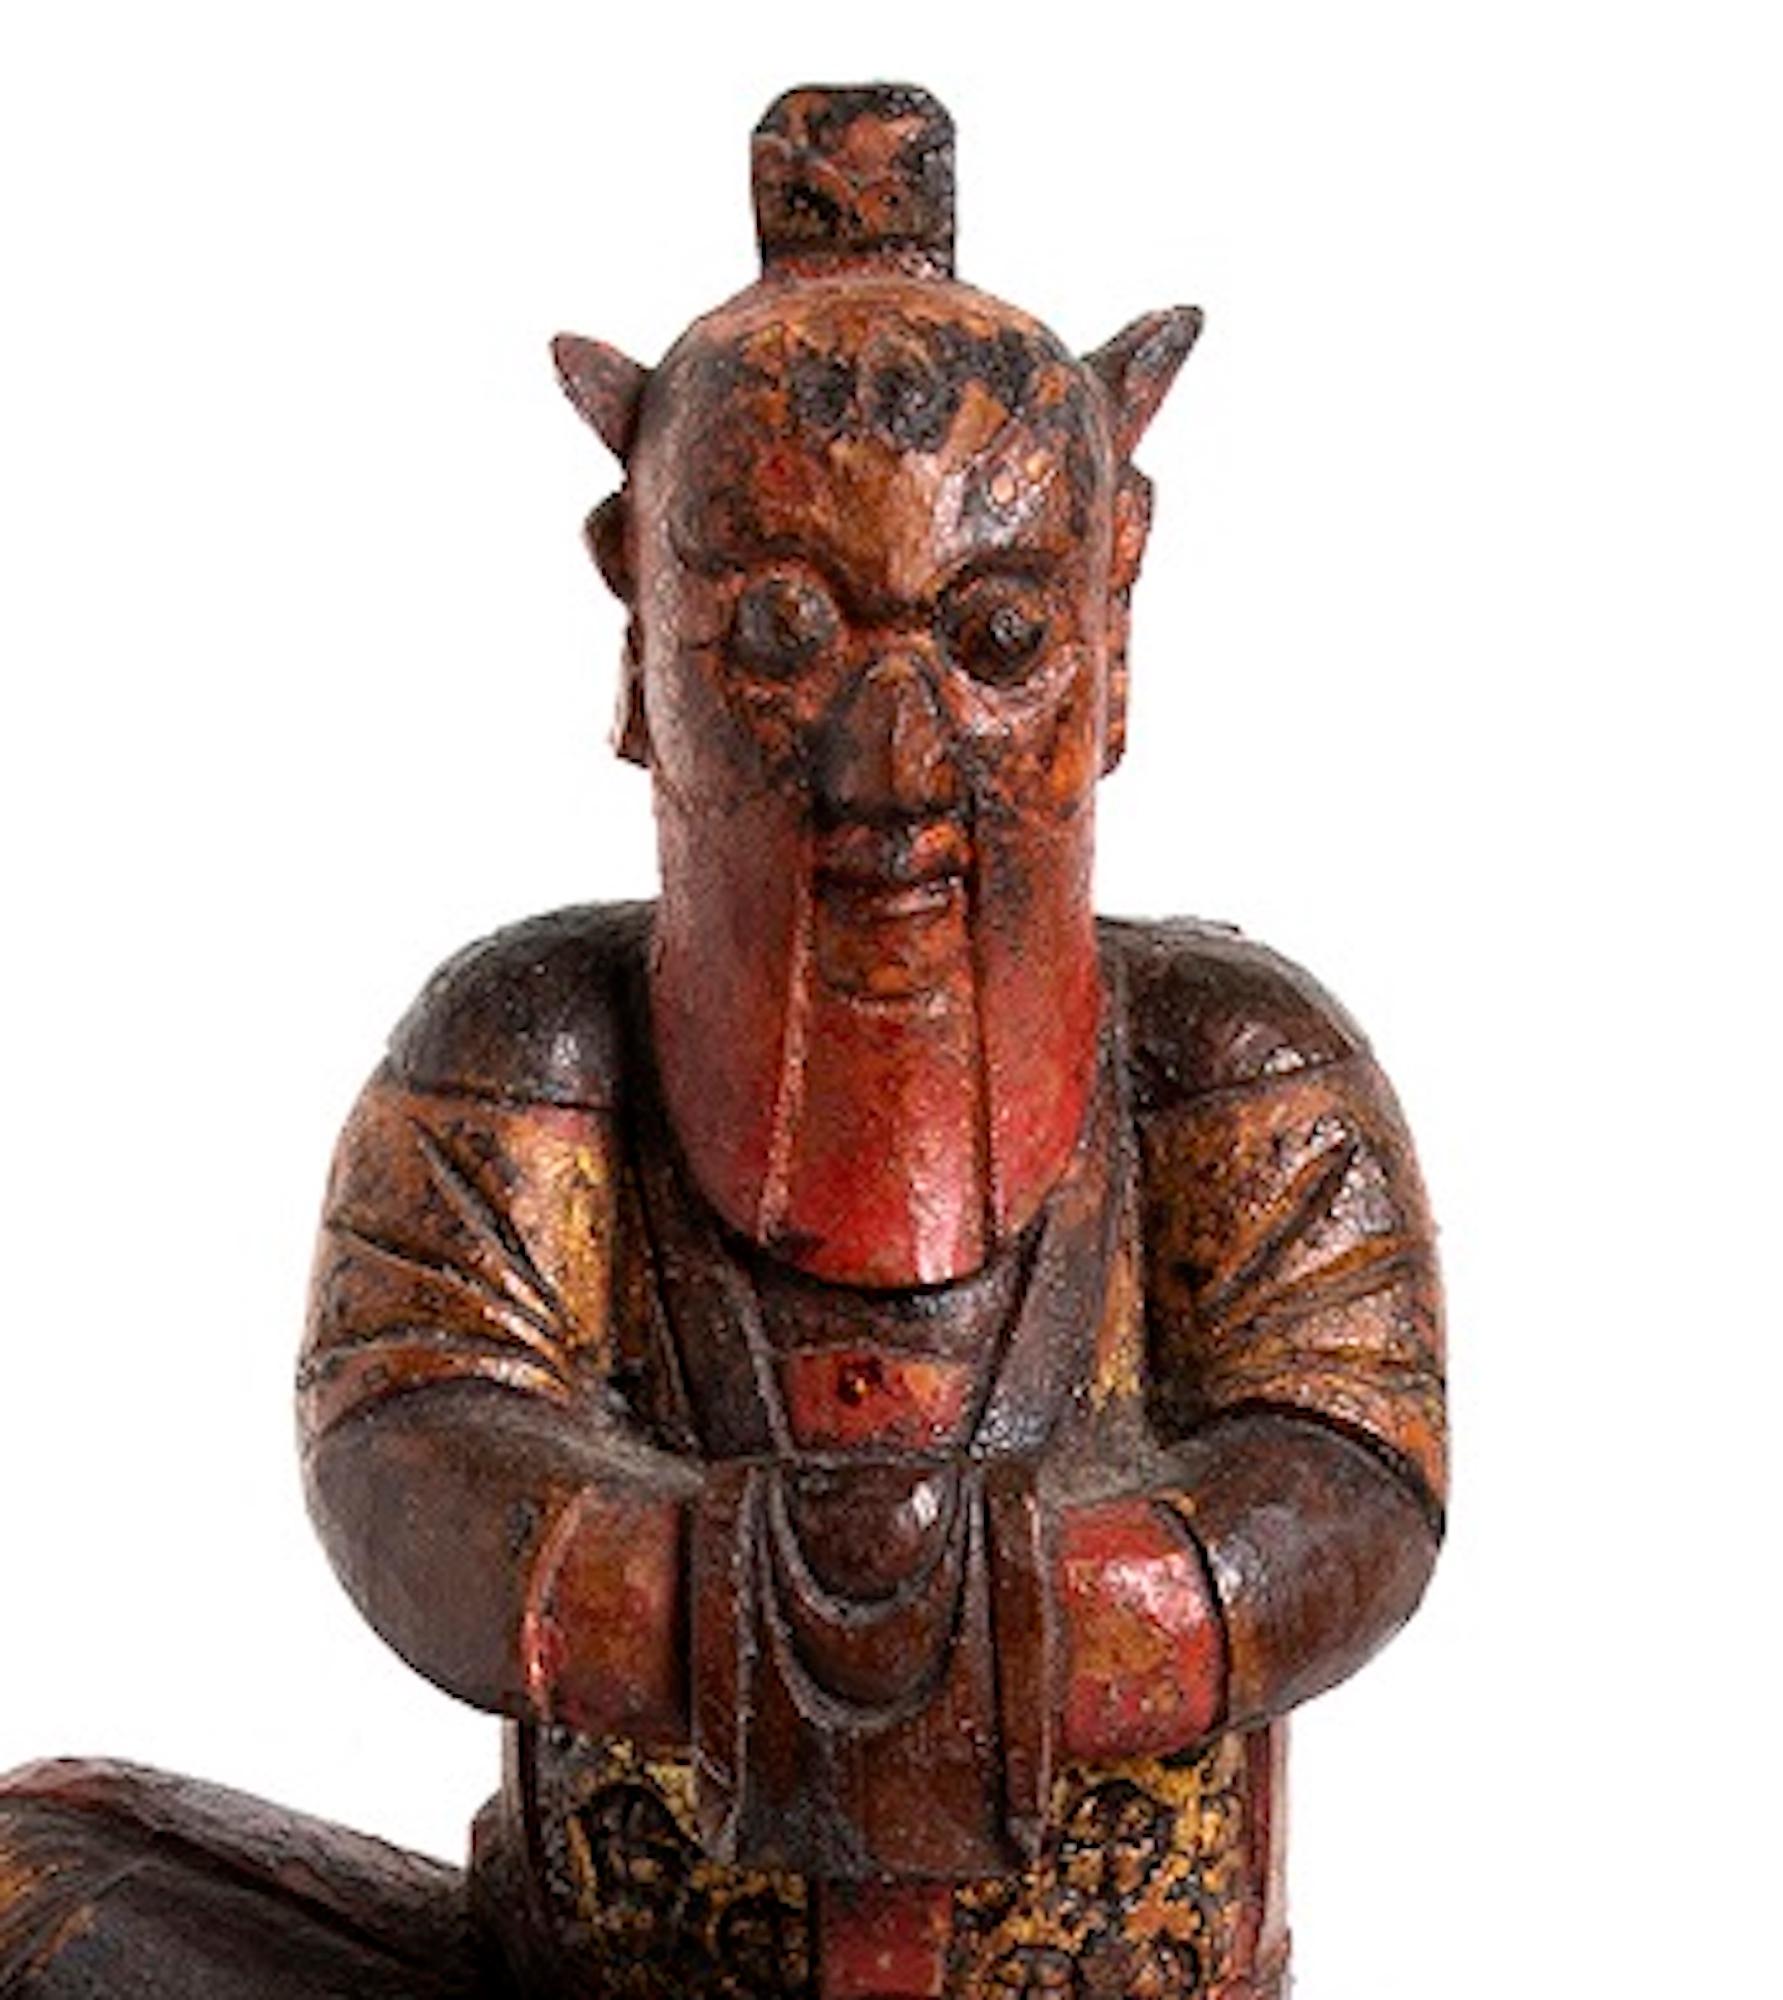 Chinese Ancient God Protector of the Houses, Qing Dynasty China